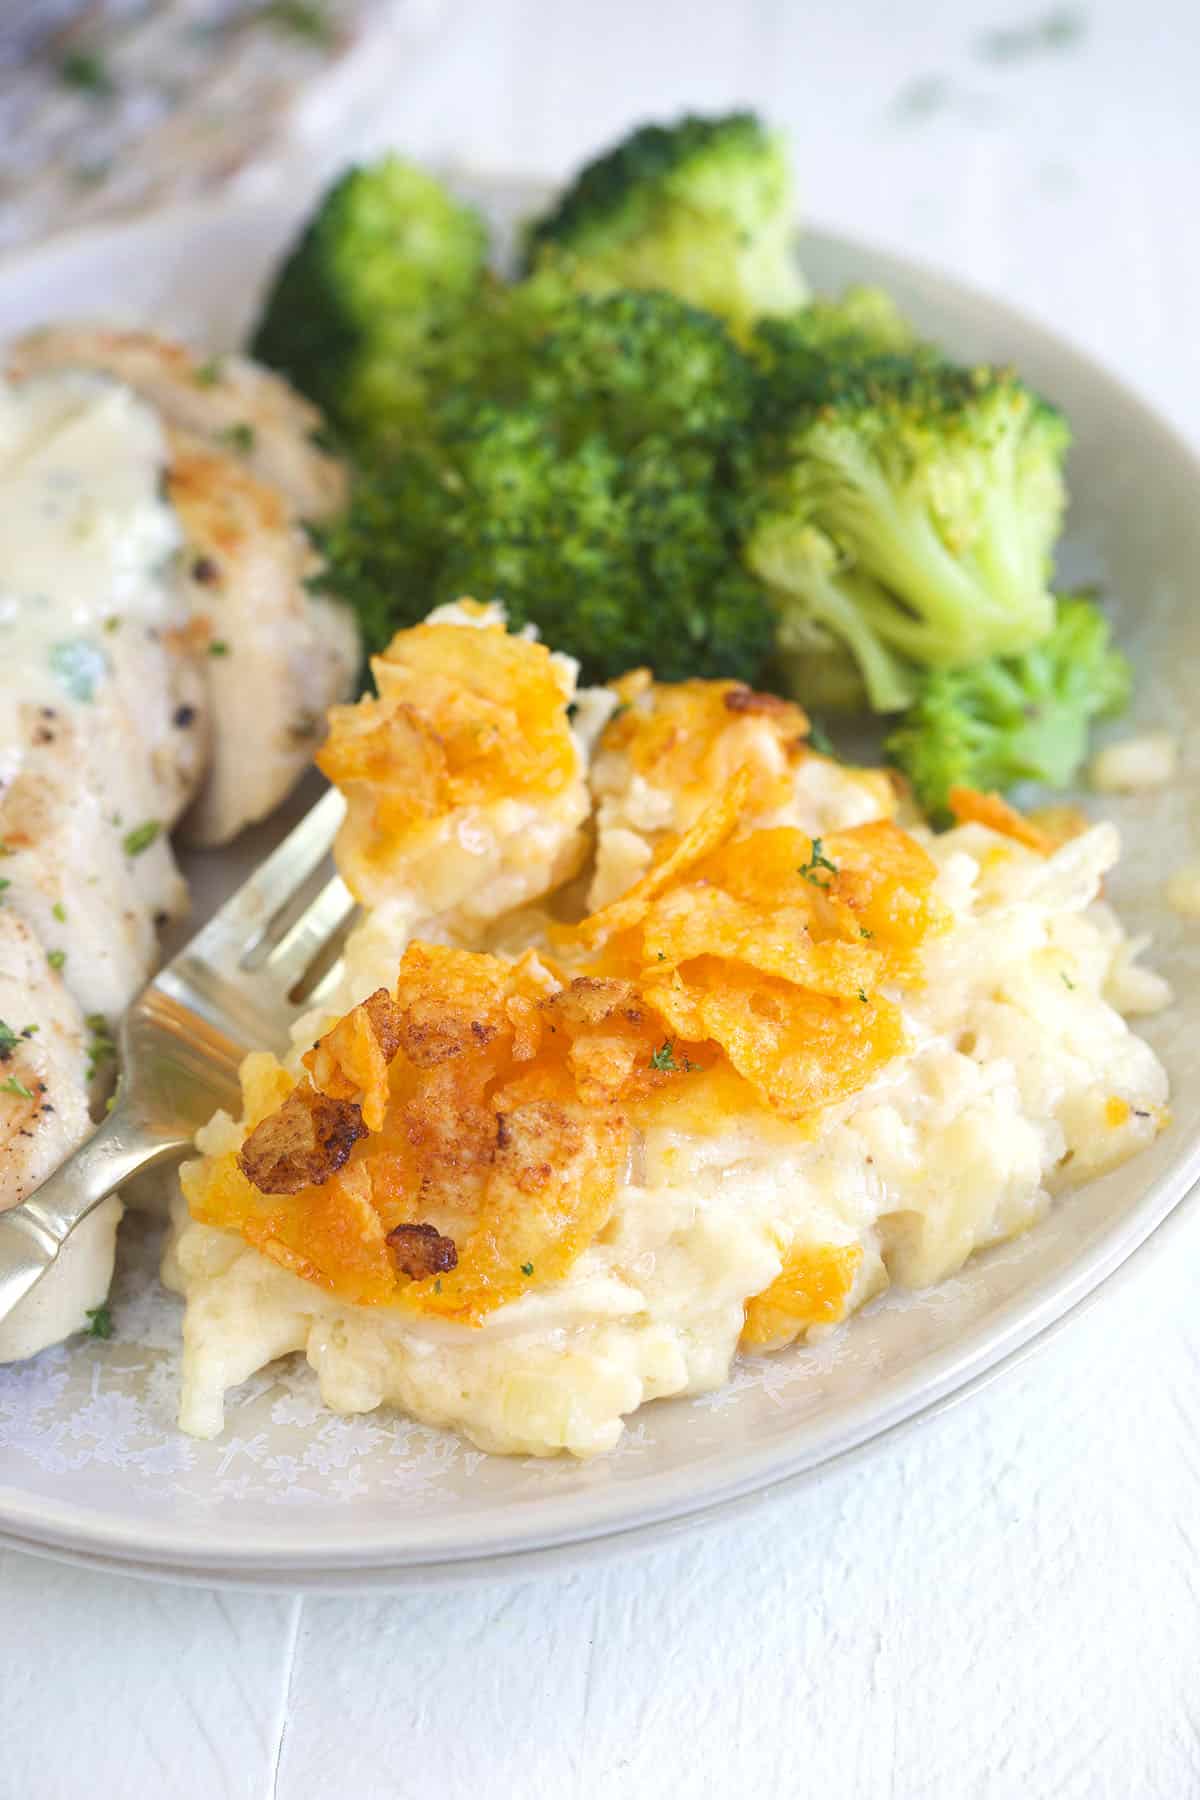 Funeral potatoes are placed next to broccoli on a plate.